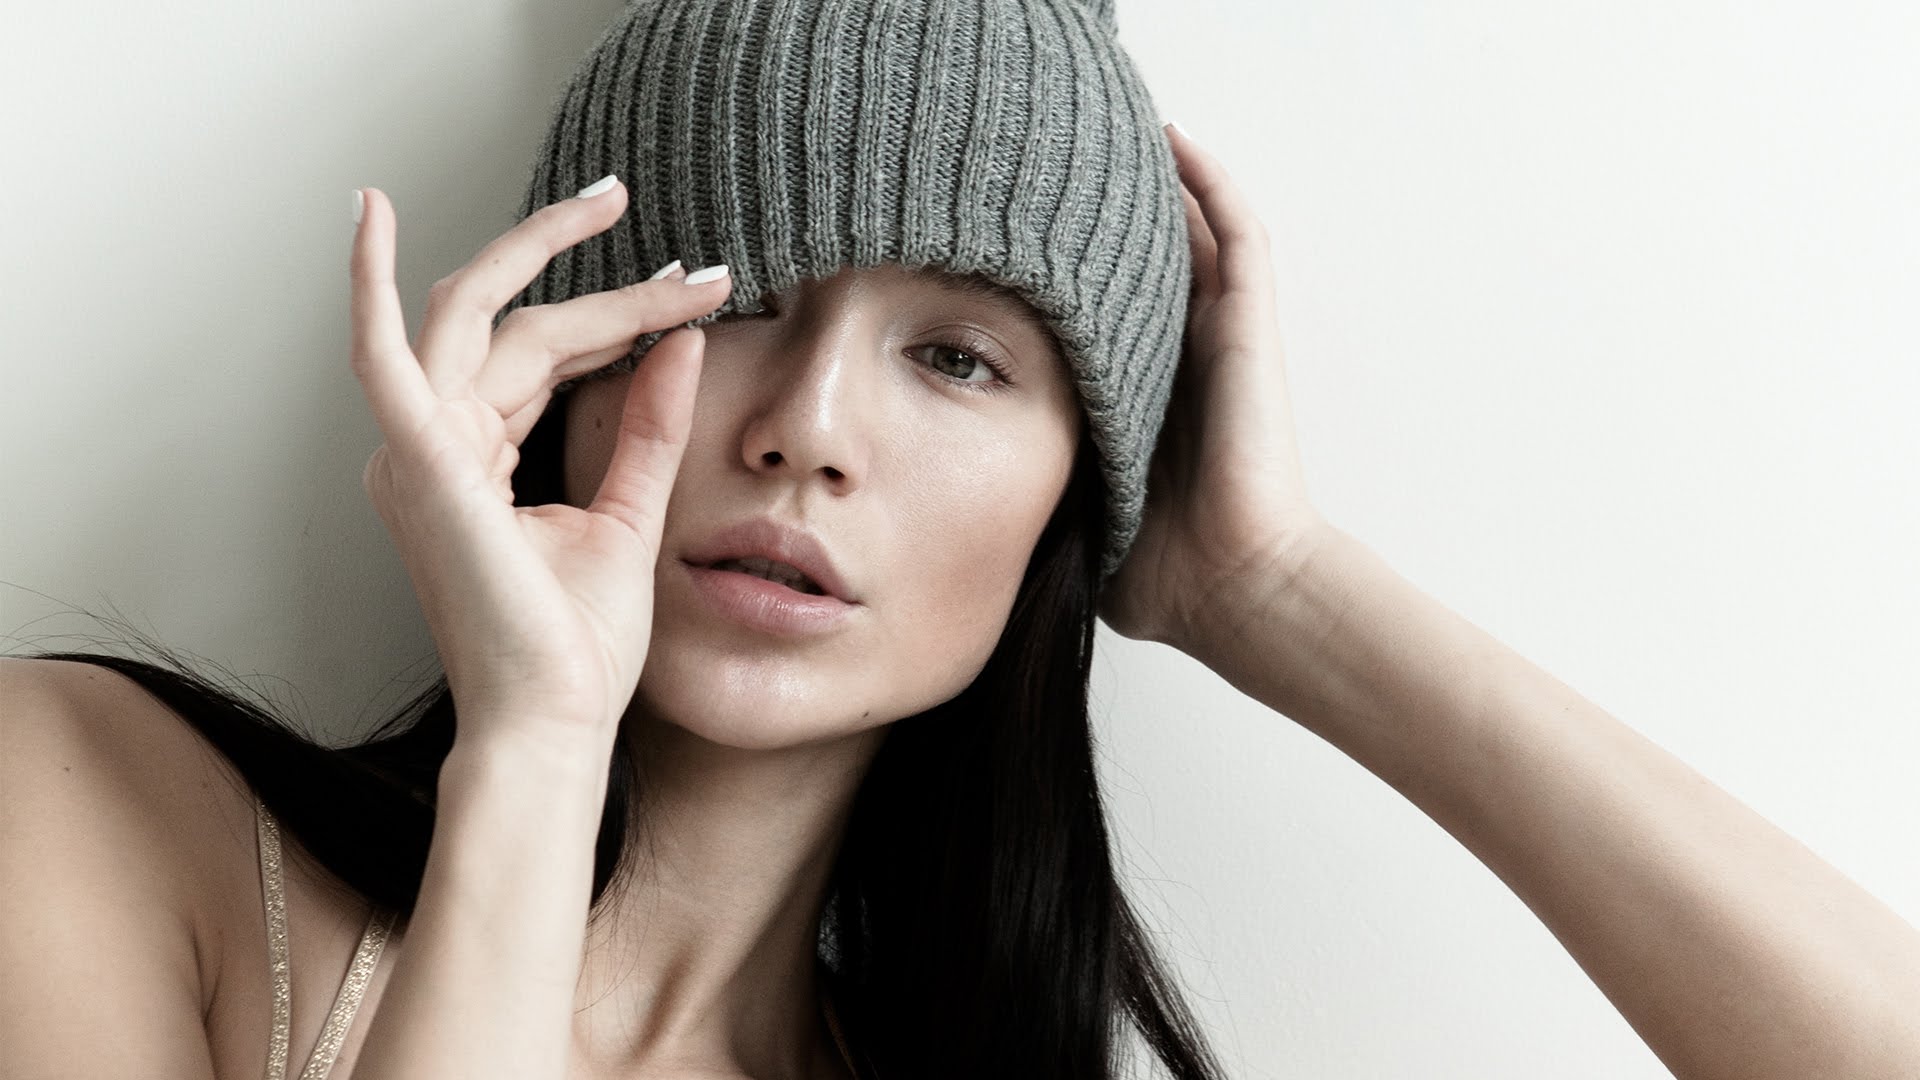 Model Looking At Viewer Women Black Hair Face Long Hair Women With Hats Toque Gray Eyes Painted Nail 1920x1080